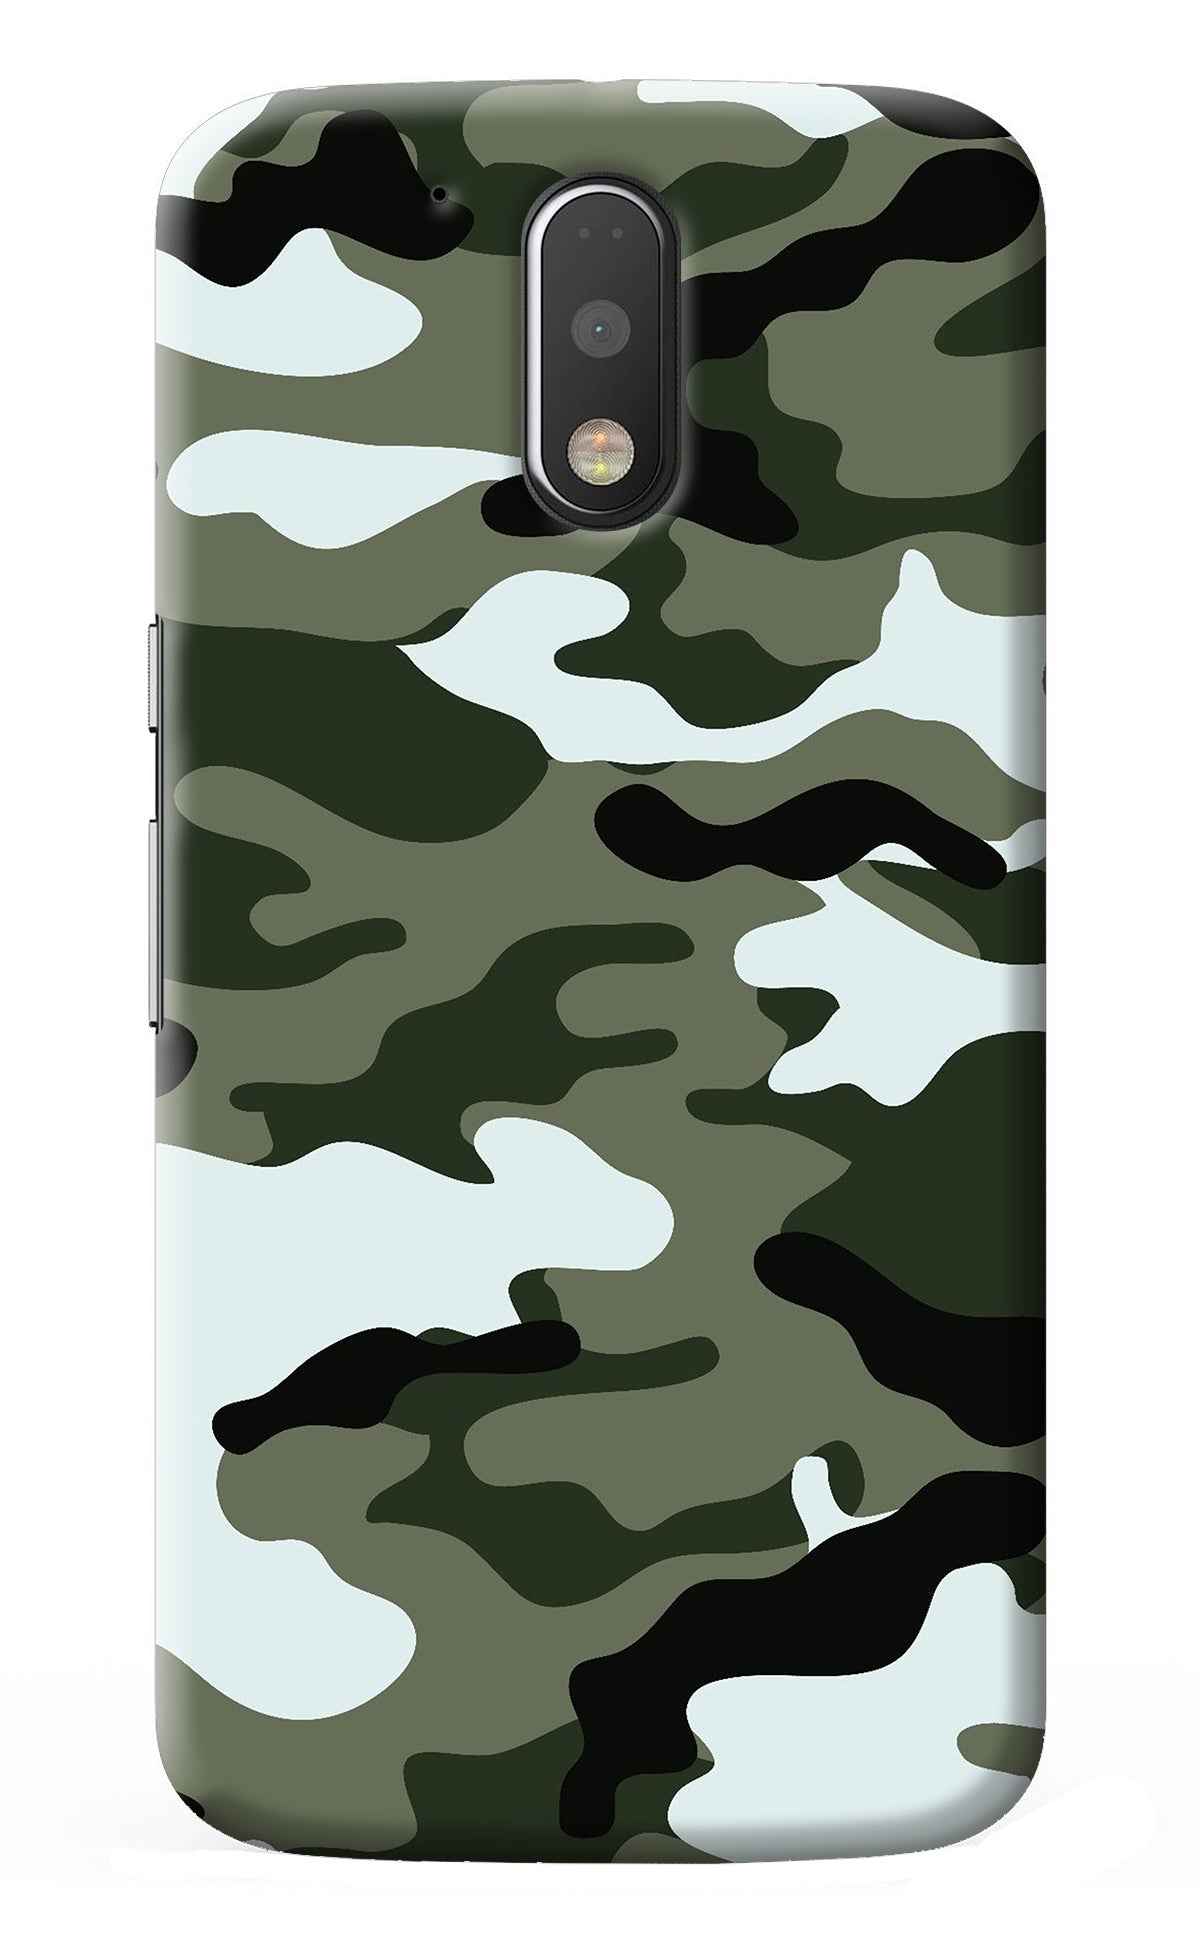 Camouflage Moto G4/G4 plus Back Cover